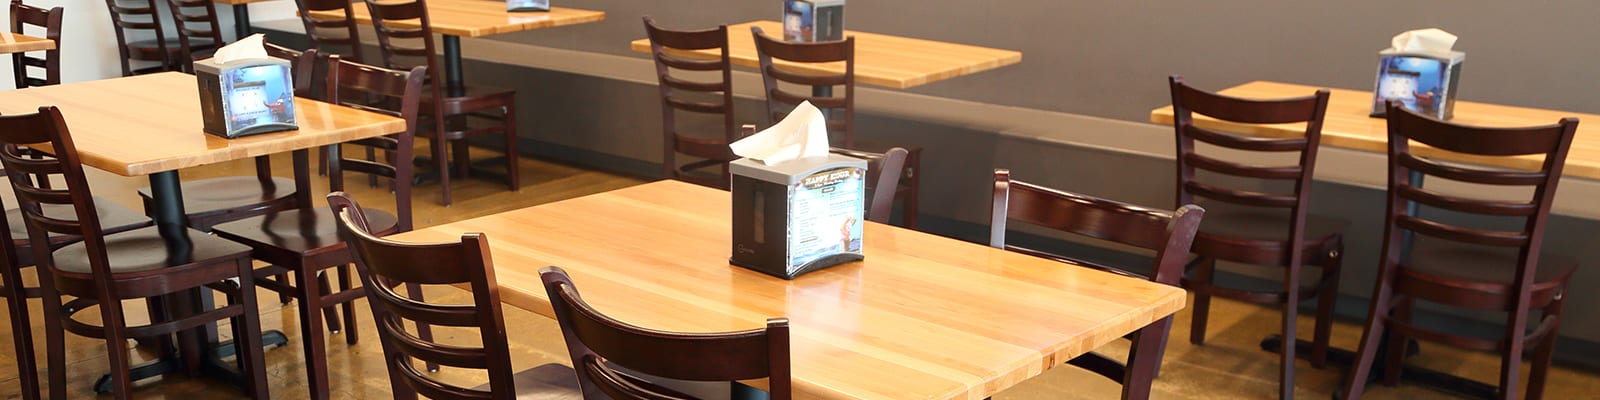 Restaurant Tables Buying Guide 